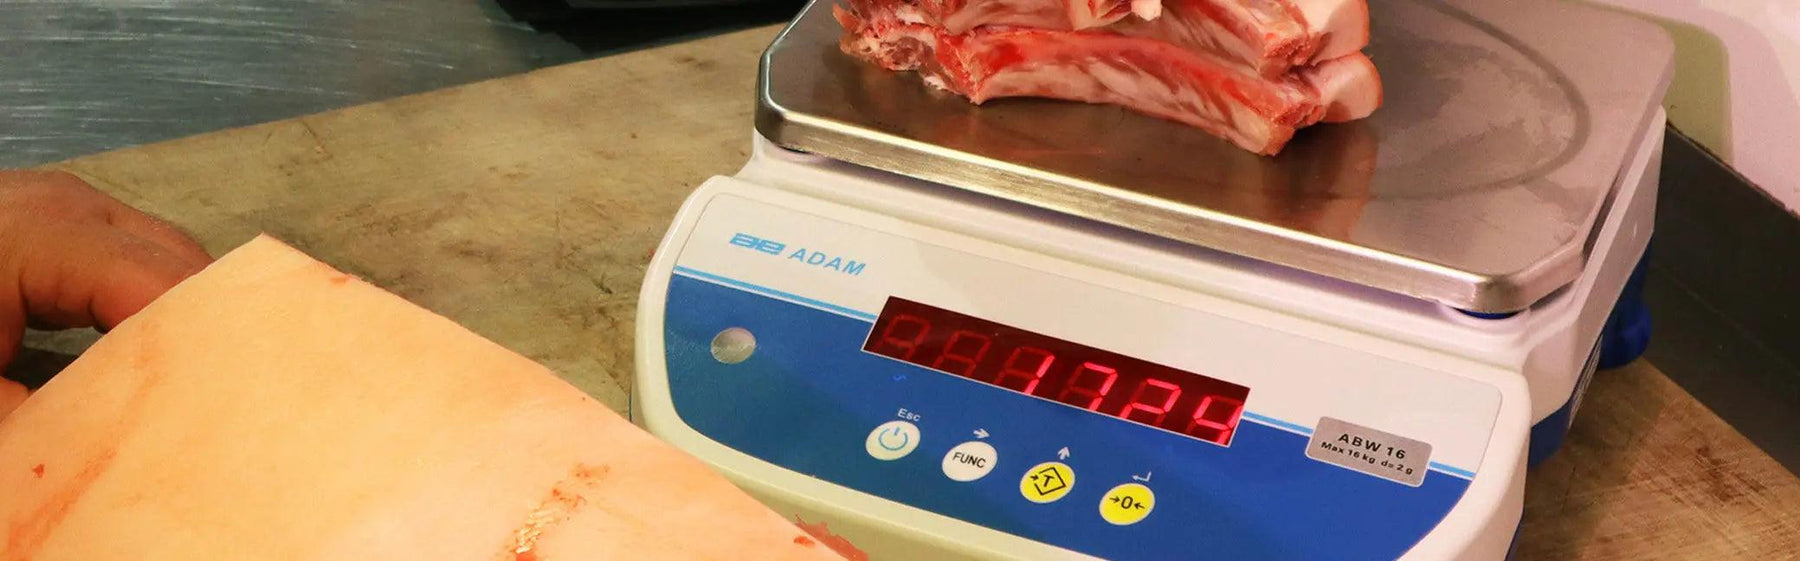 4 Recommended Butcher Scales - Inscale Scales